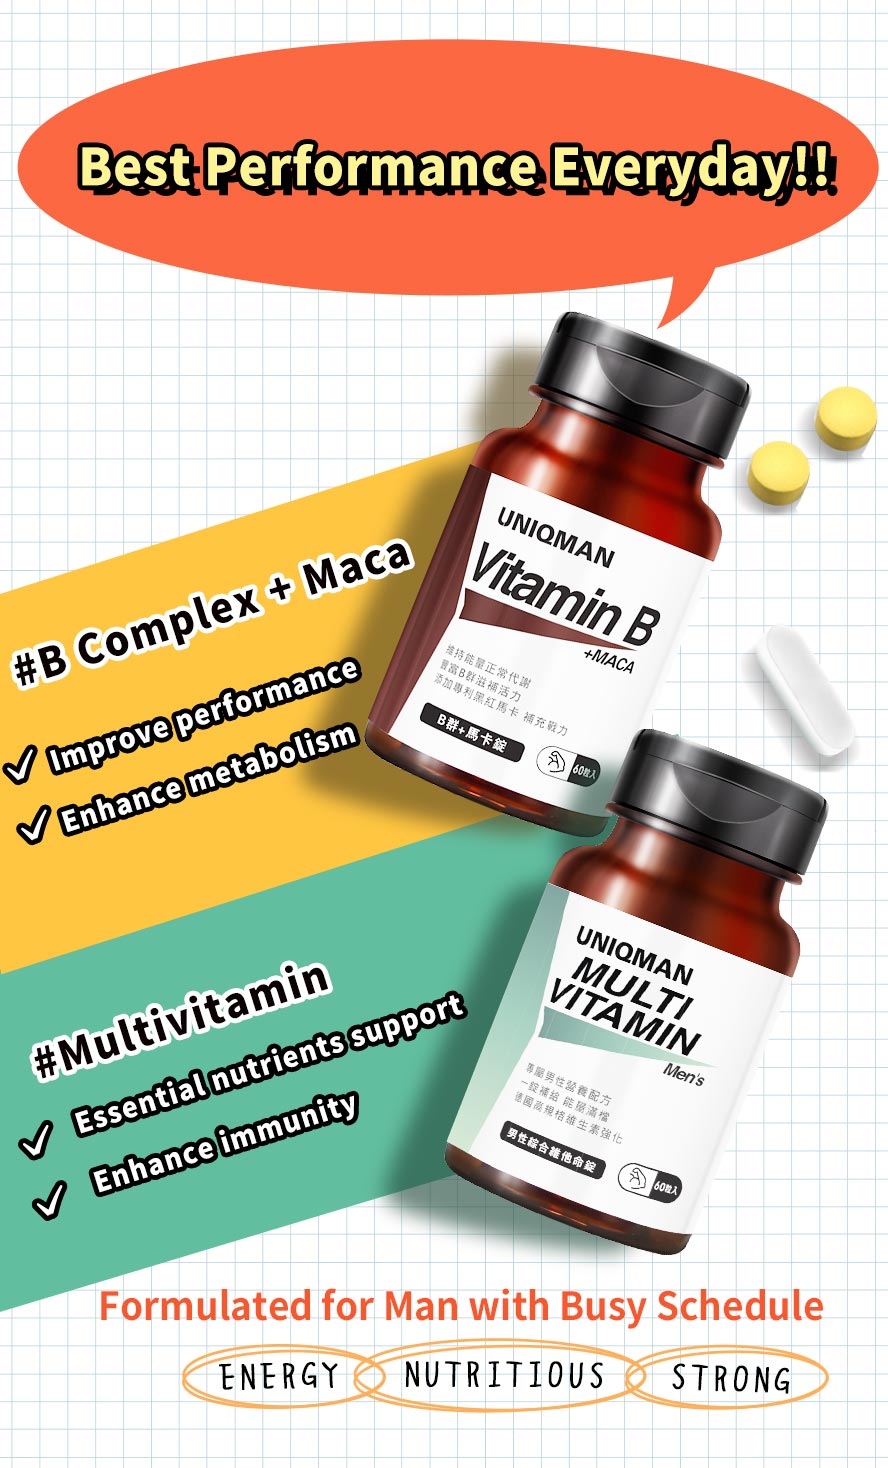 UNIQMAN B Complex+Maca & Multivitamin are formulated for men with busy schedule, they can improve performance, enhance metabolism, support sufficient nutrition, and enhance immunity